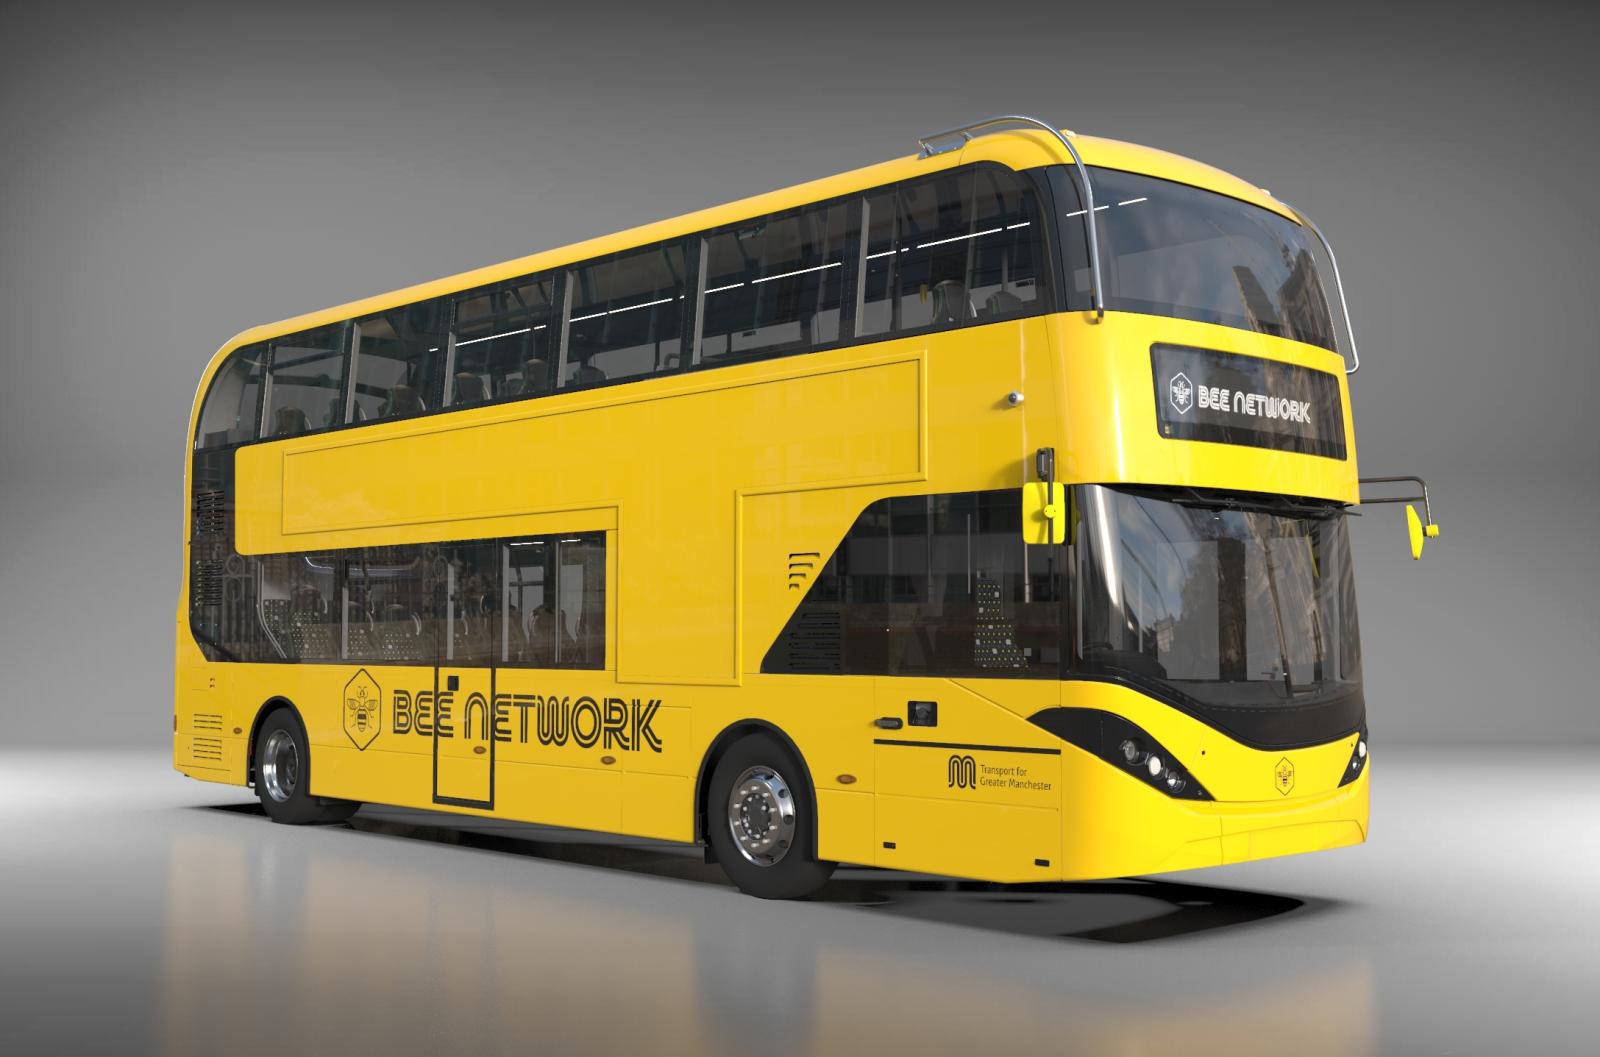 A new Transport for Greater Manchester bus